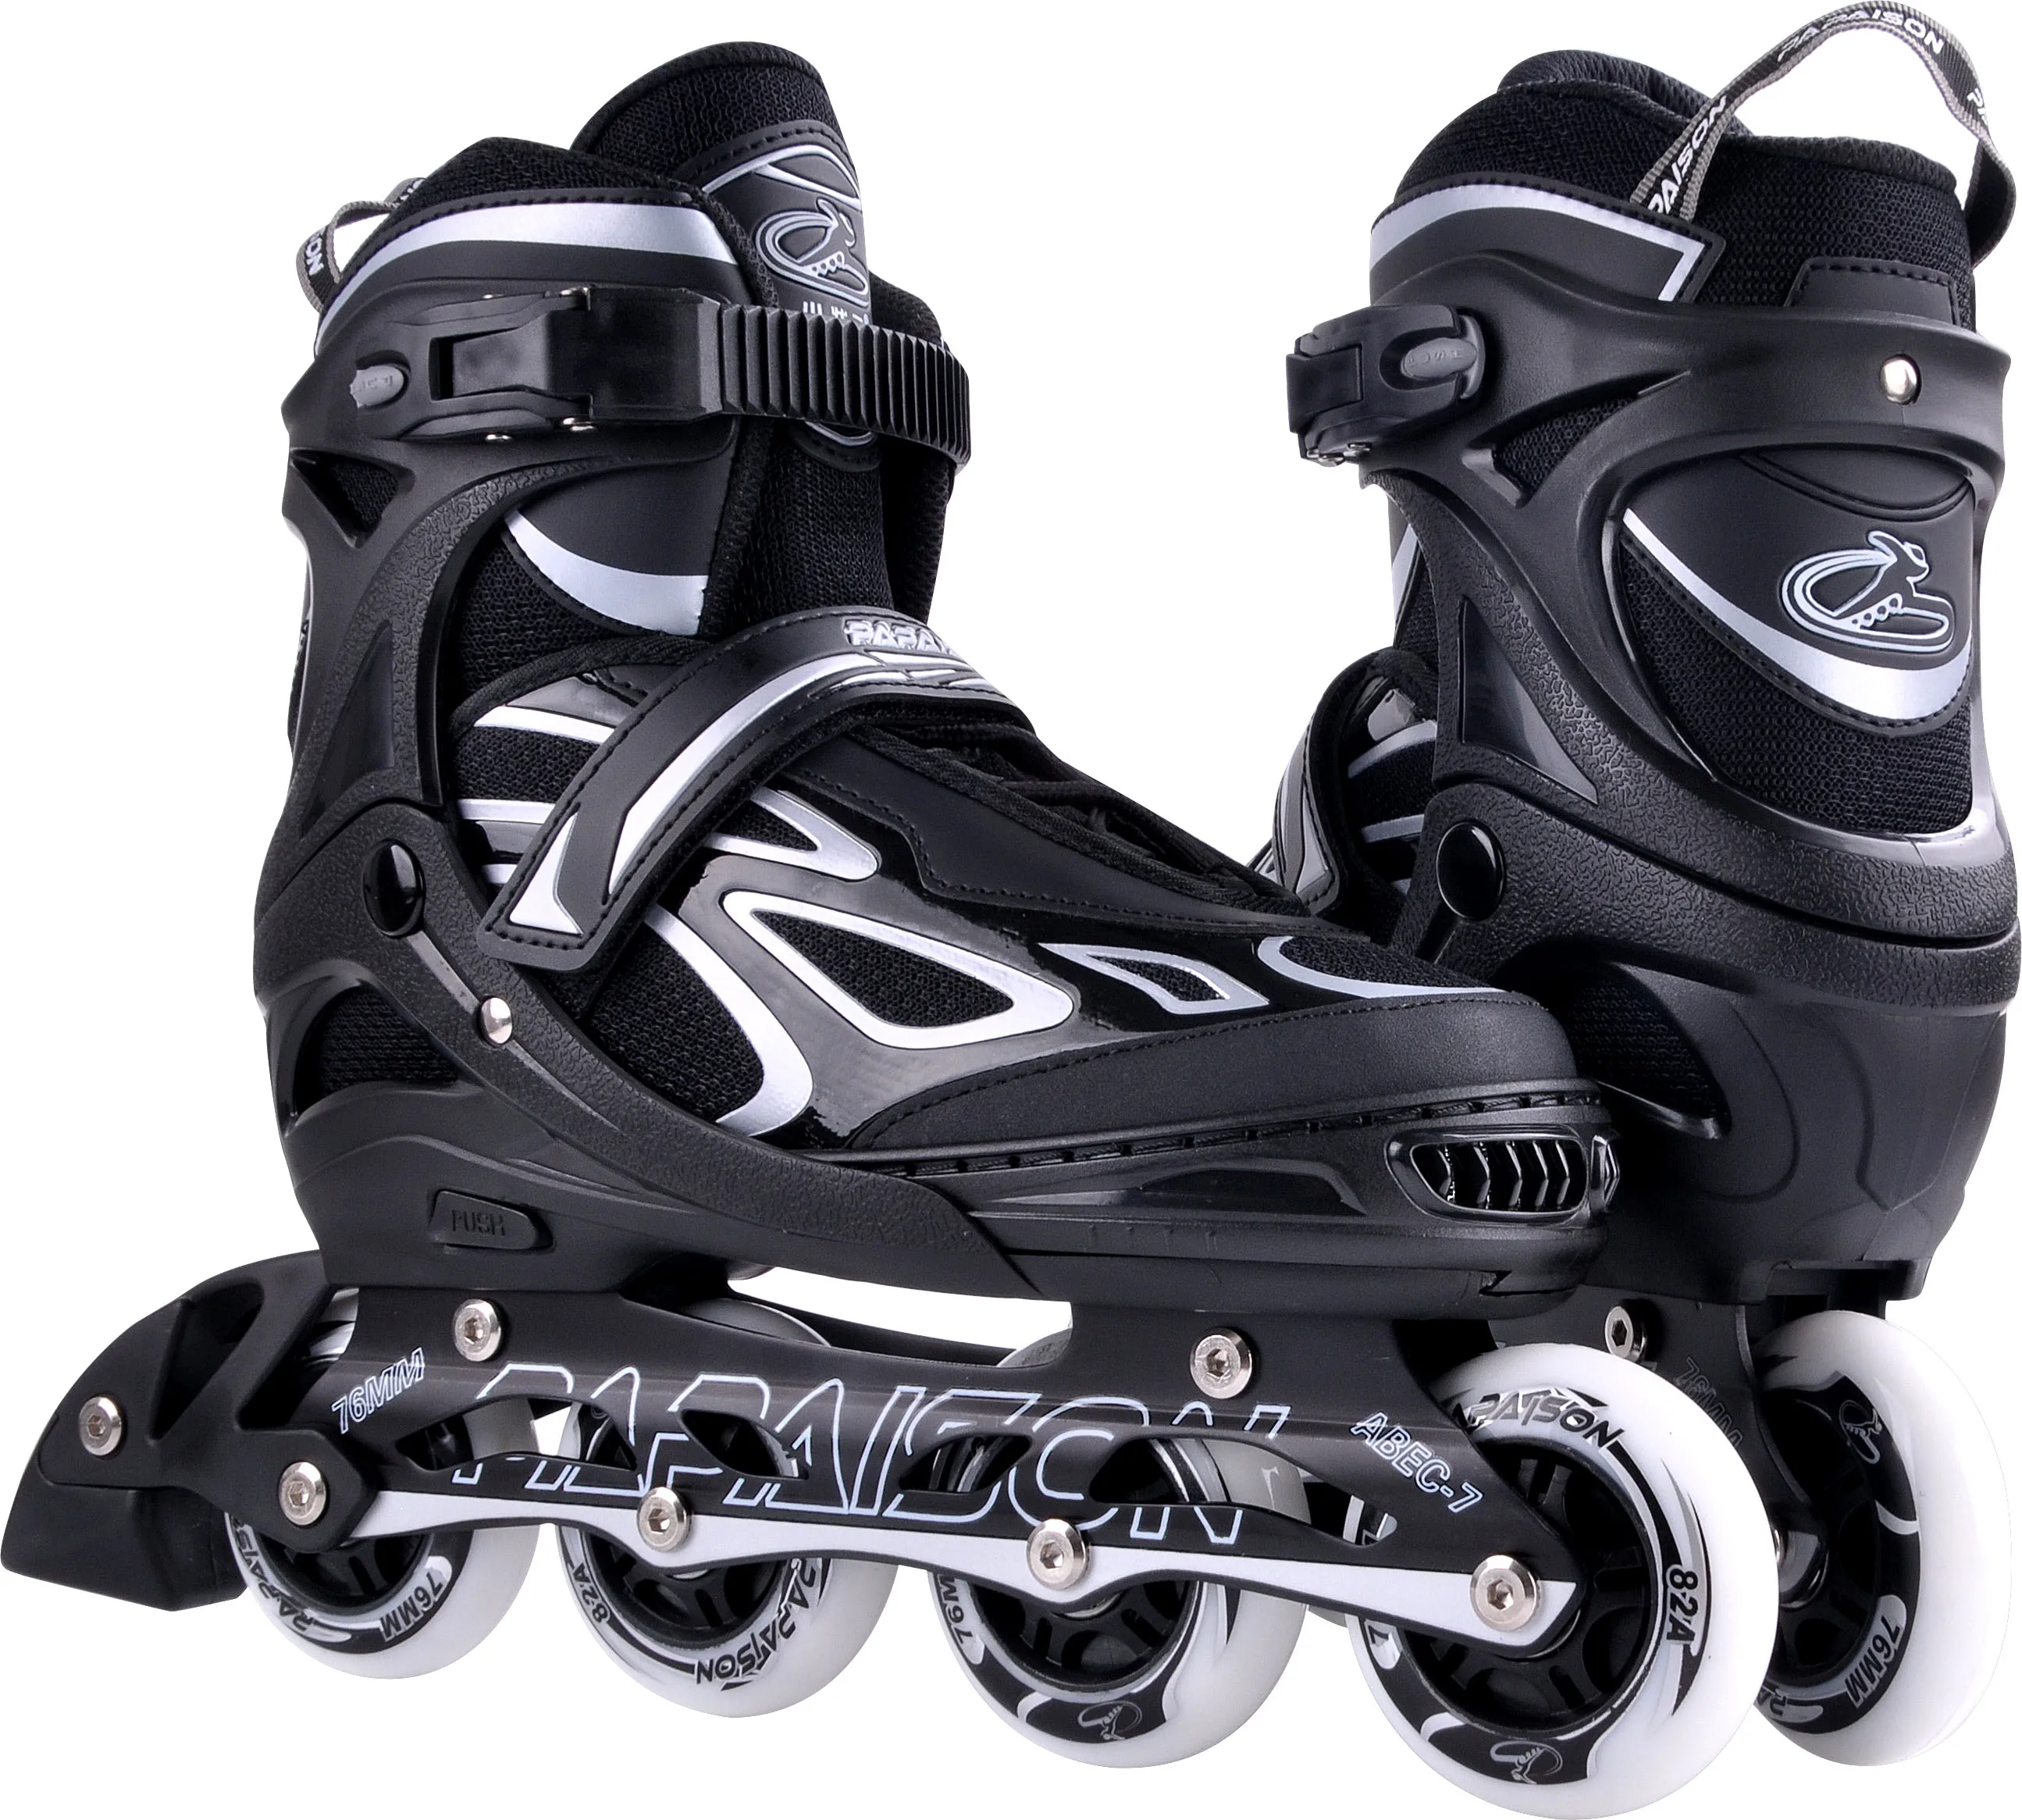 

Amazon best sellers China Top 1 roller inline skates 4 wheels roller skate shoes for kids and adults